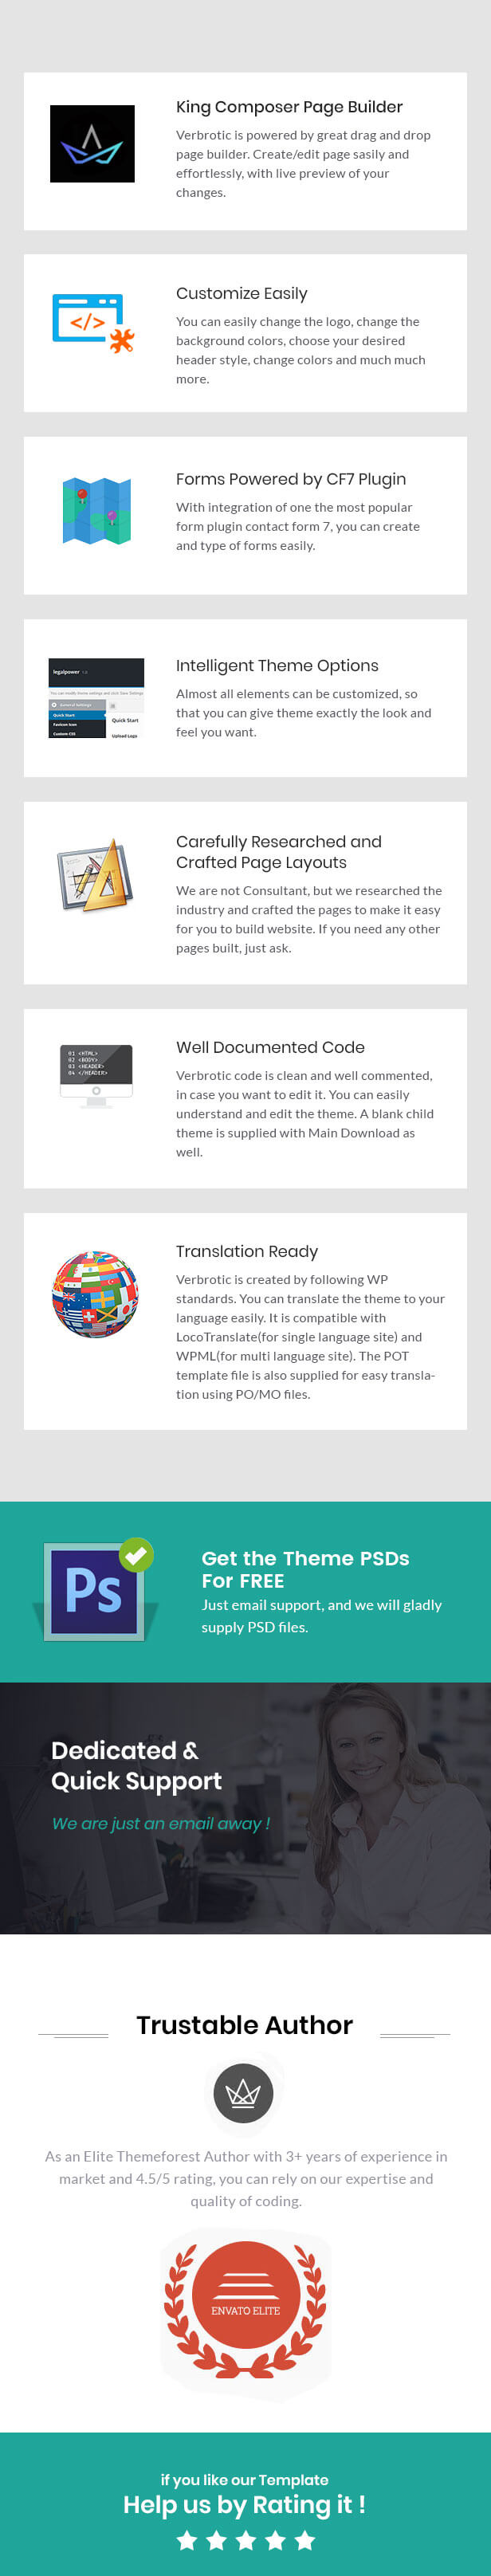 Verbrotic : Business Consulting WordPress Theme - 4